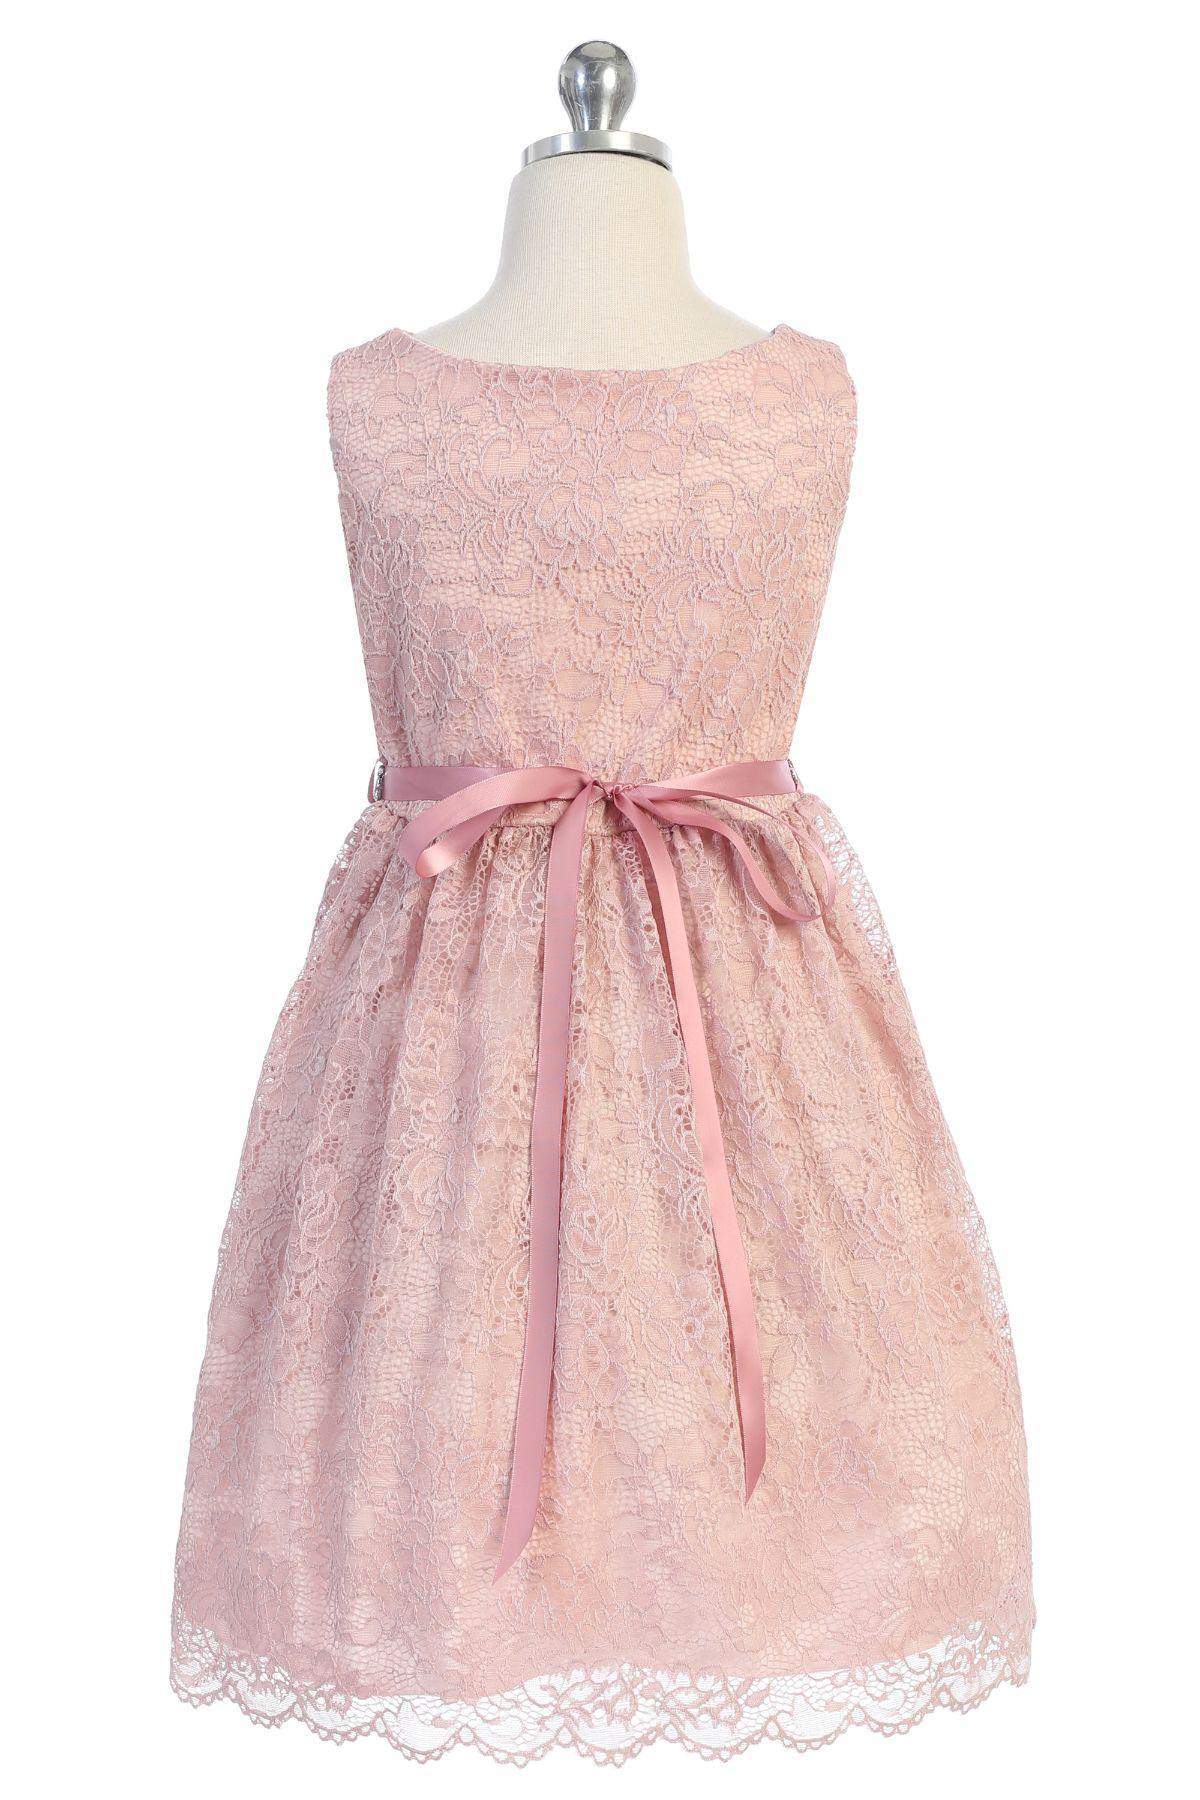 Stretch Lace Dress-Kid's Dream-big_girl,color_Blush Pink,Color_Coral,Color_Mint,fabric_Lace,girl-dress,length_Knee Length,meta-related-collection-shop-the-outfit-girls,Pink-collection,size_02,size_04,size_06,size_08,size_10,size_12